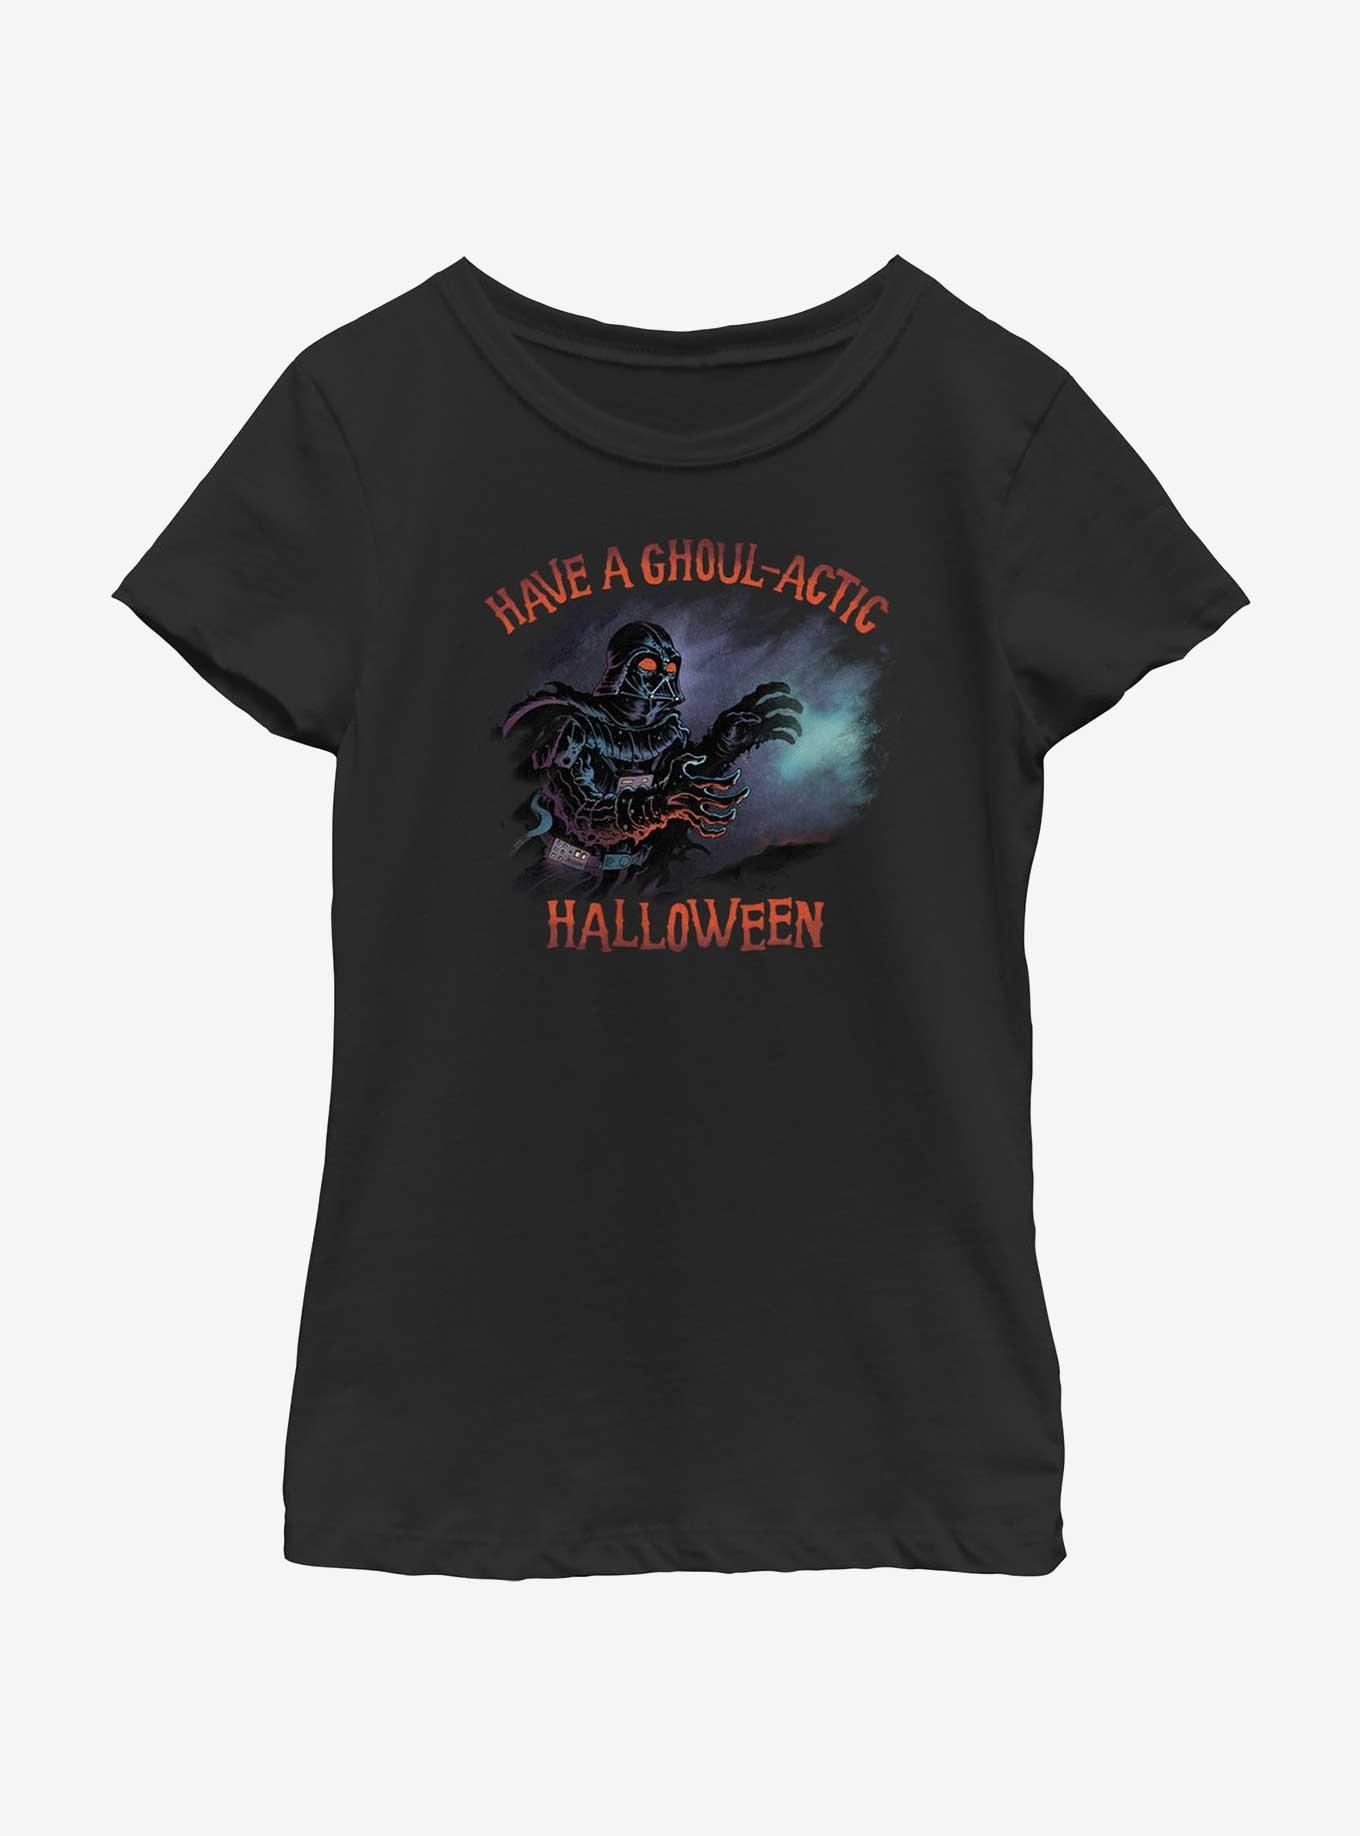 Star Wars Ghoulactic Halloween Youth Girls T-Shirt, BLACK, hi-res